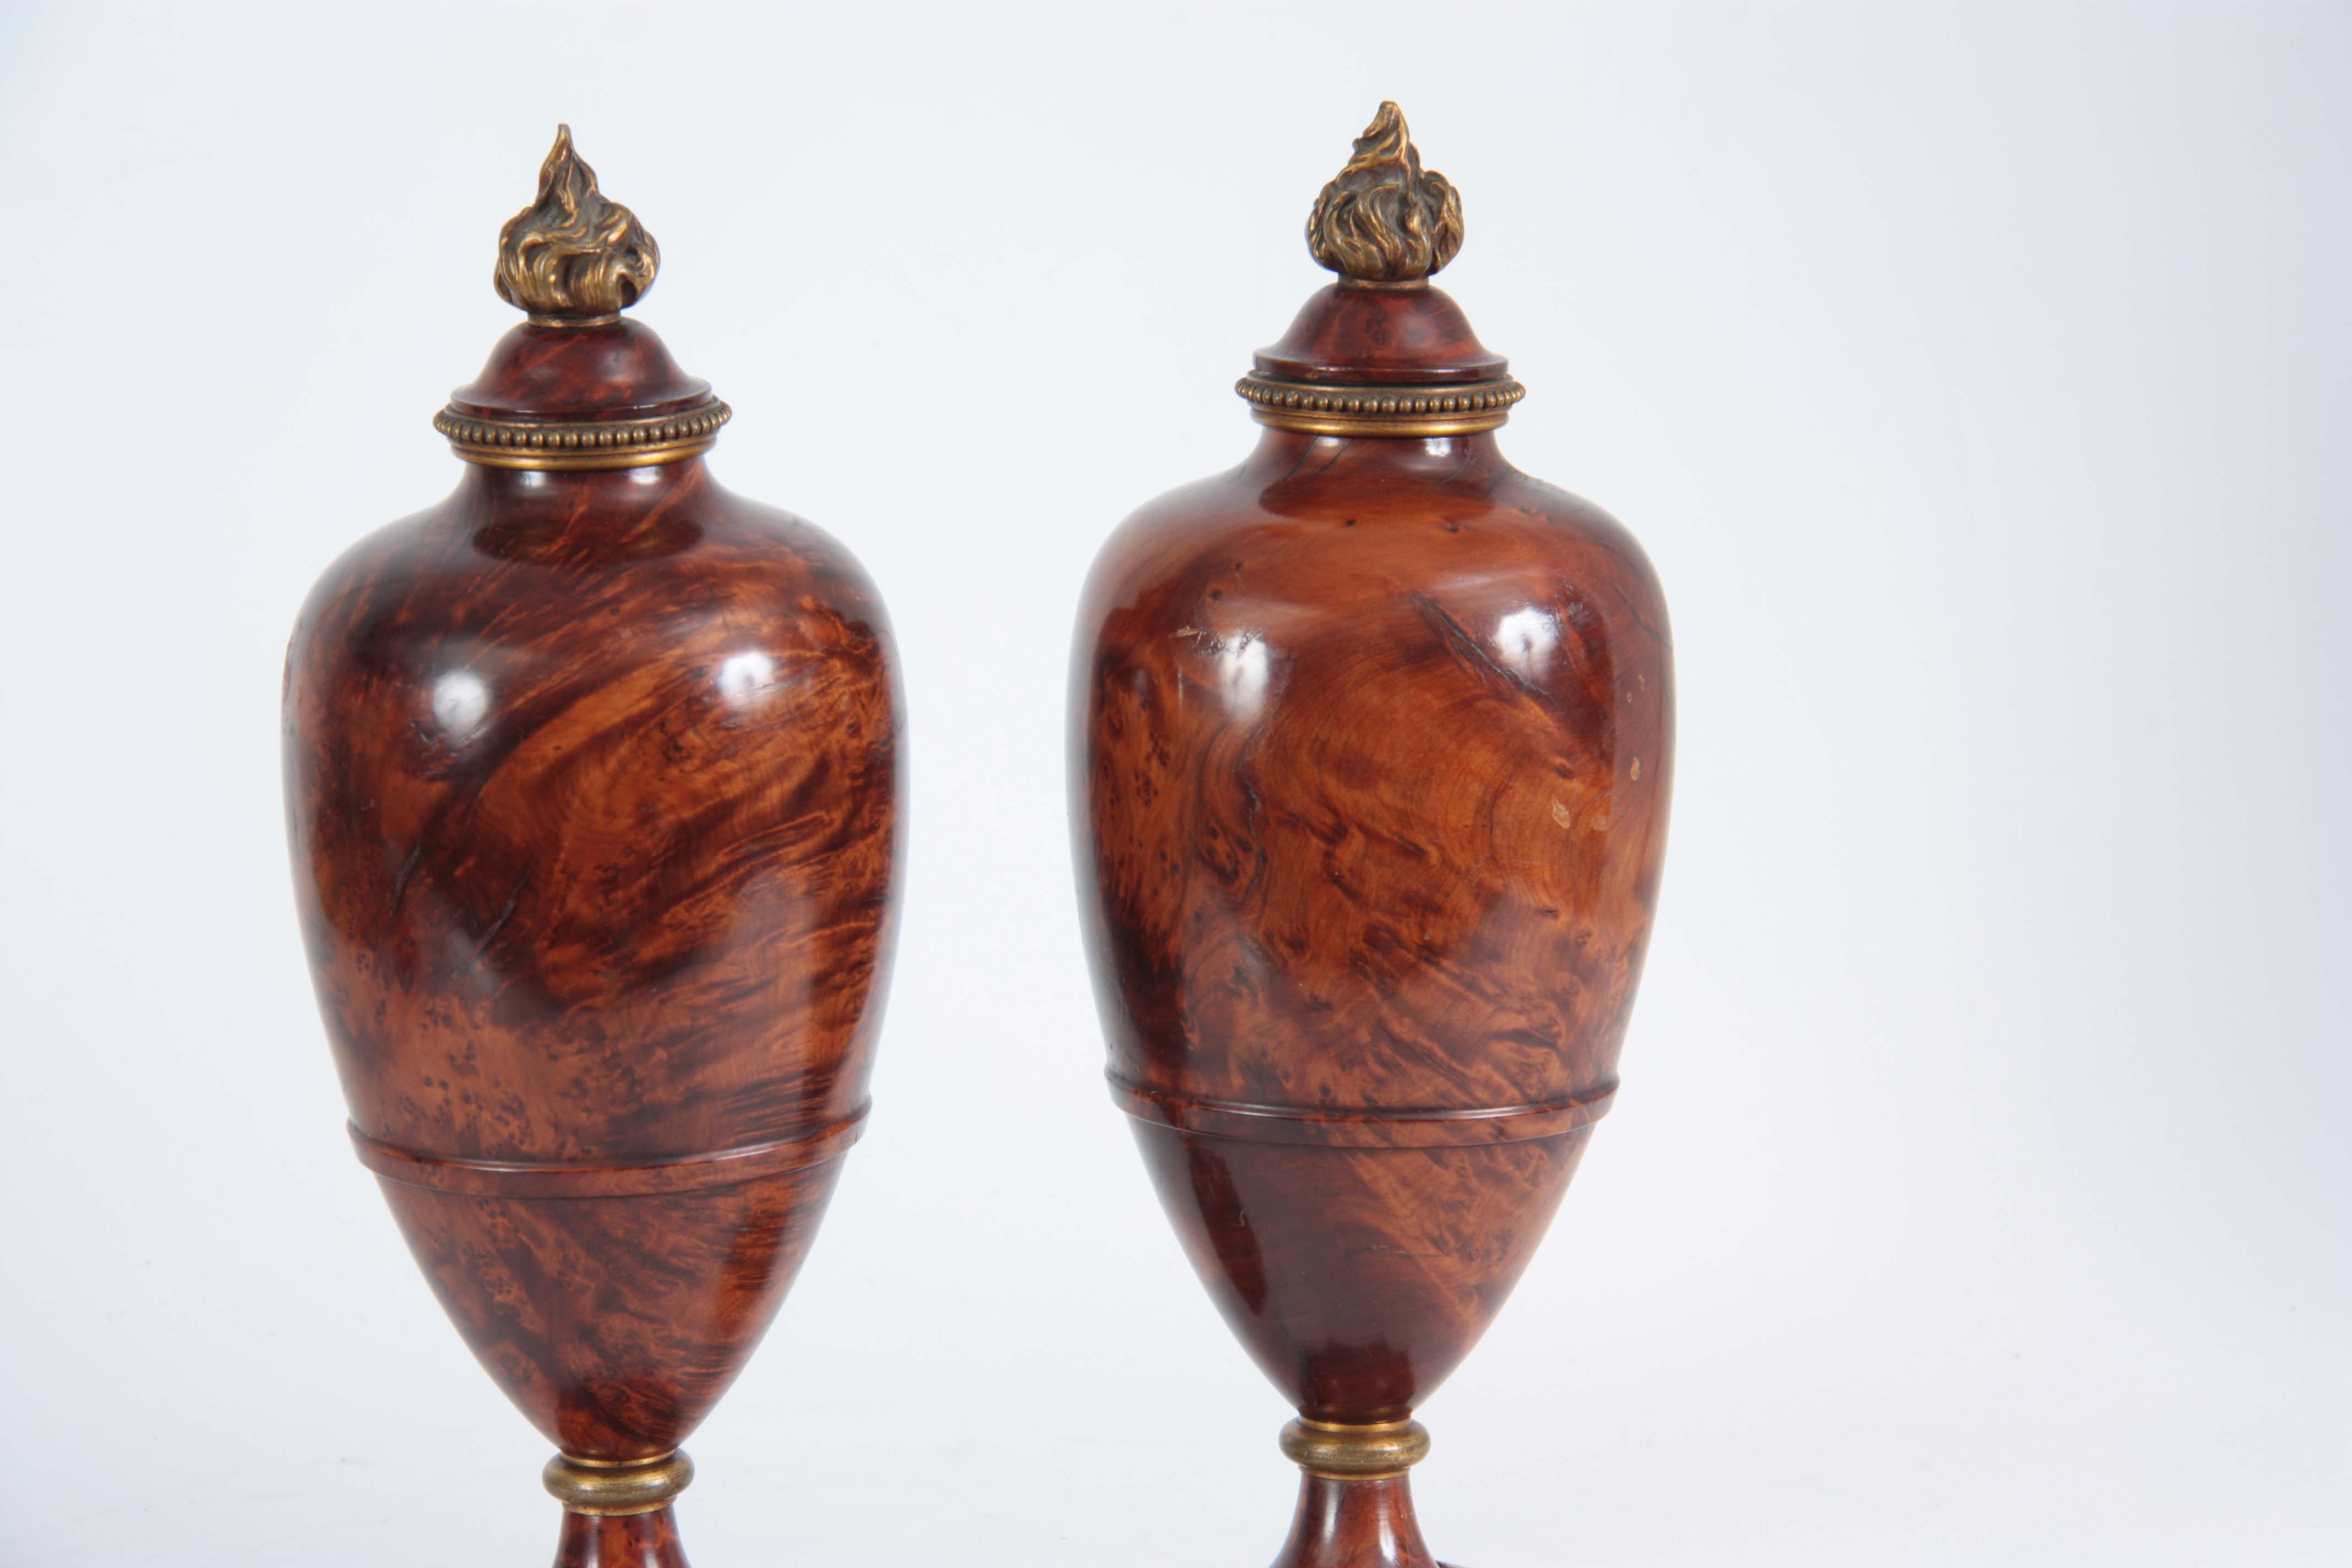 A FINE PAIR OF 19TH CENTURY BURR YEW-WOOD ORMOLU MOUNTED URNS with flame finials and bulbous - Image 4 of 4